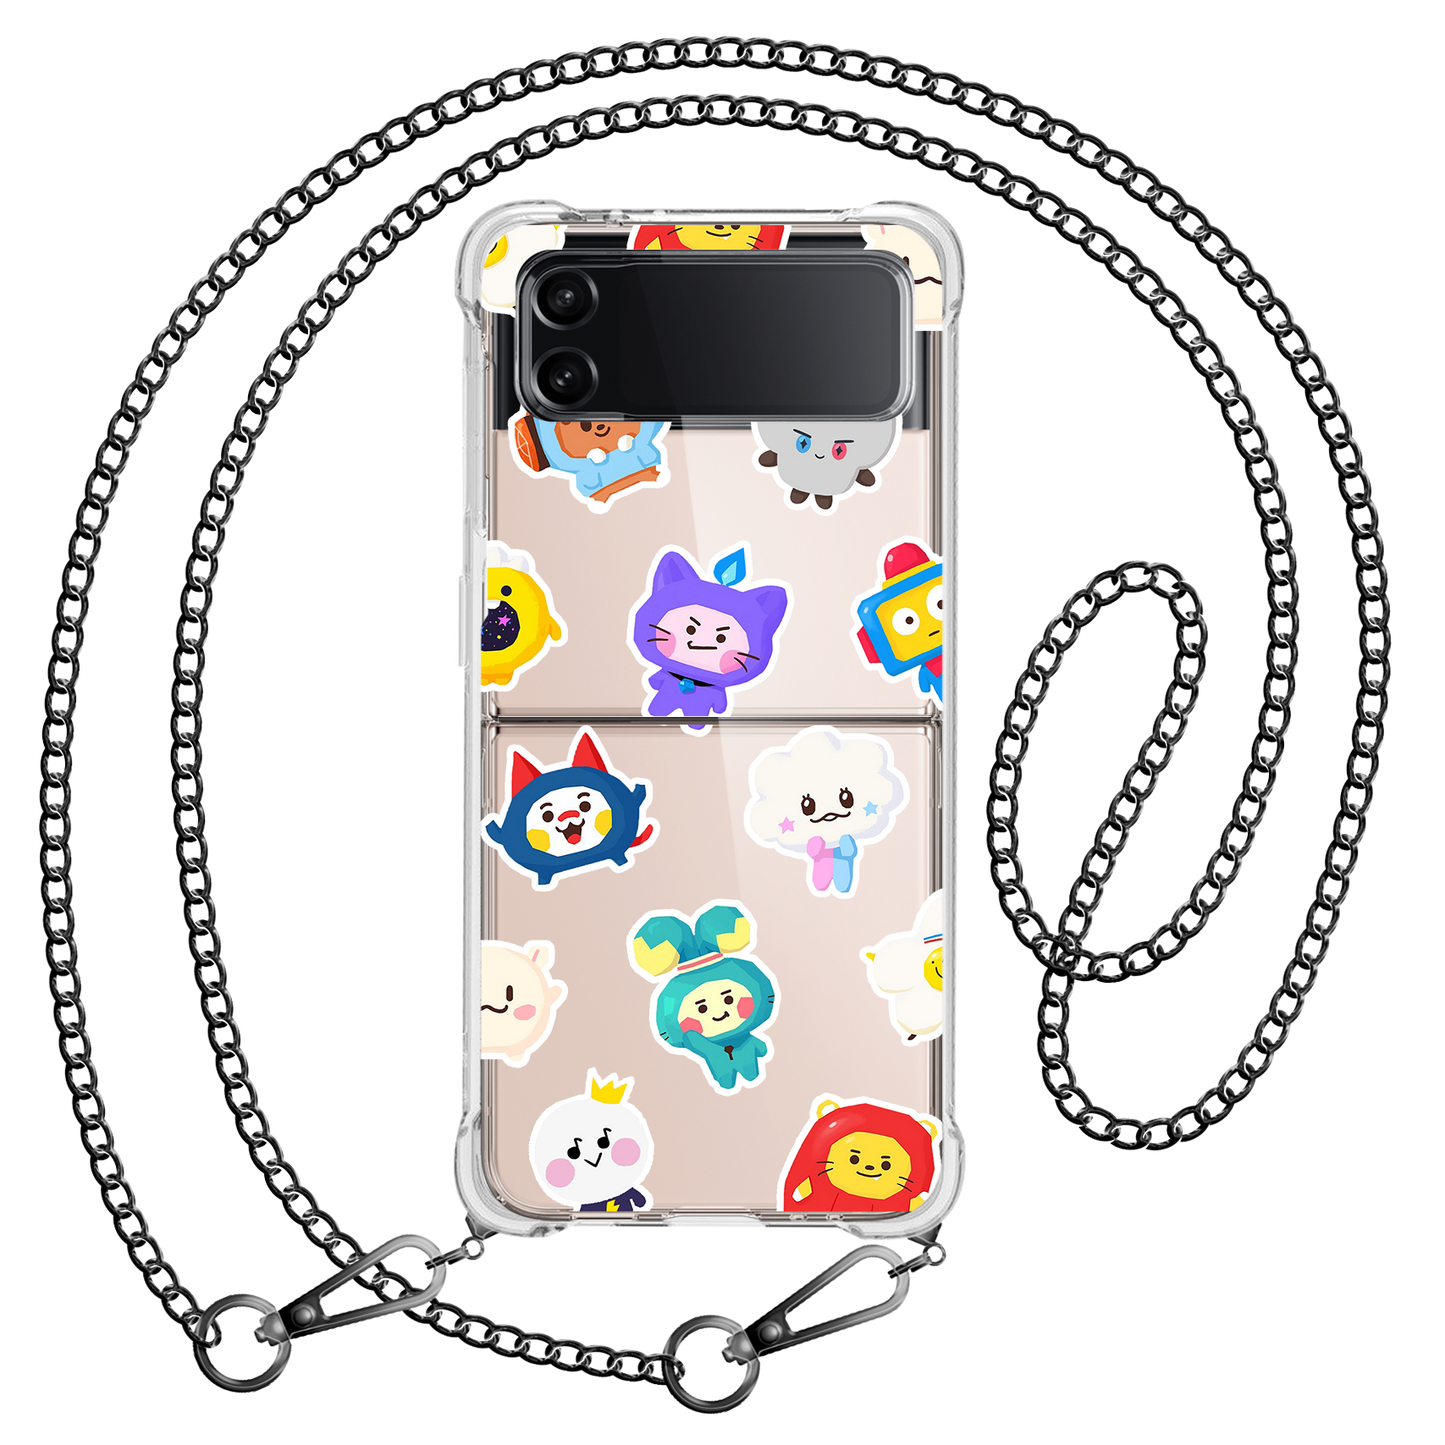 Android Flip / Fold Case - Treasure sticker Pack